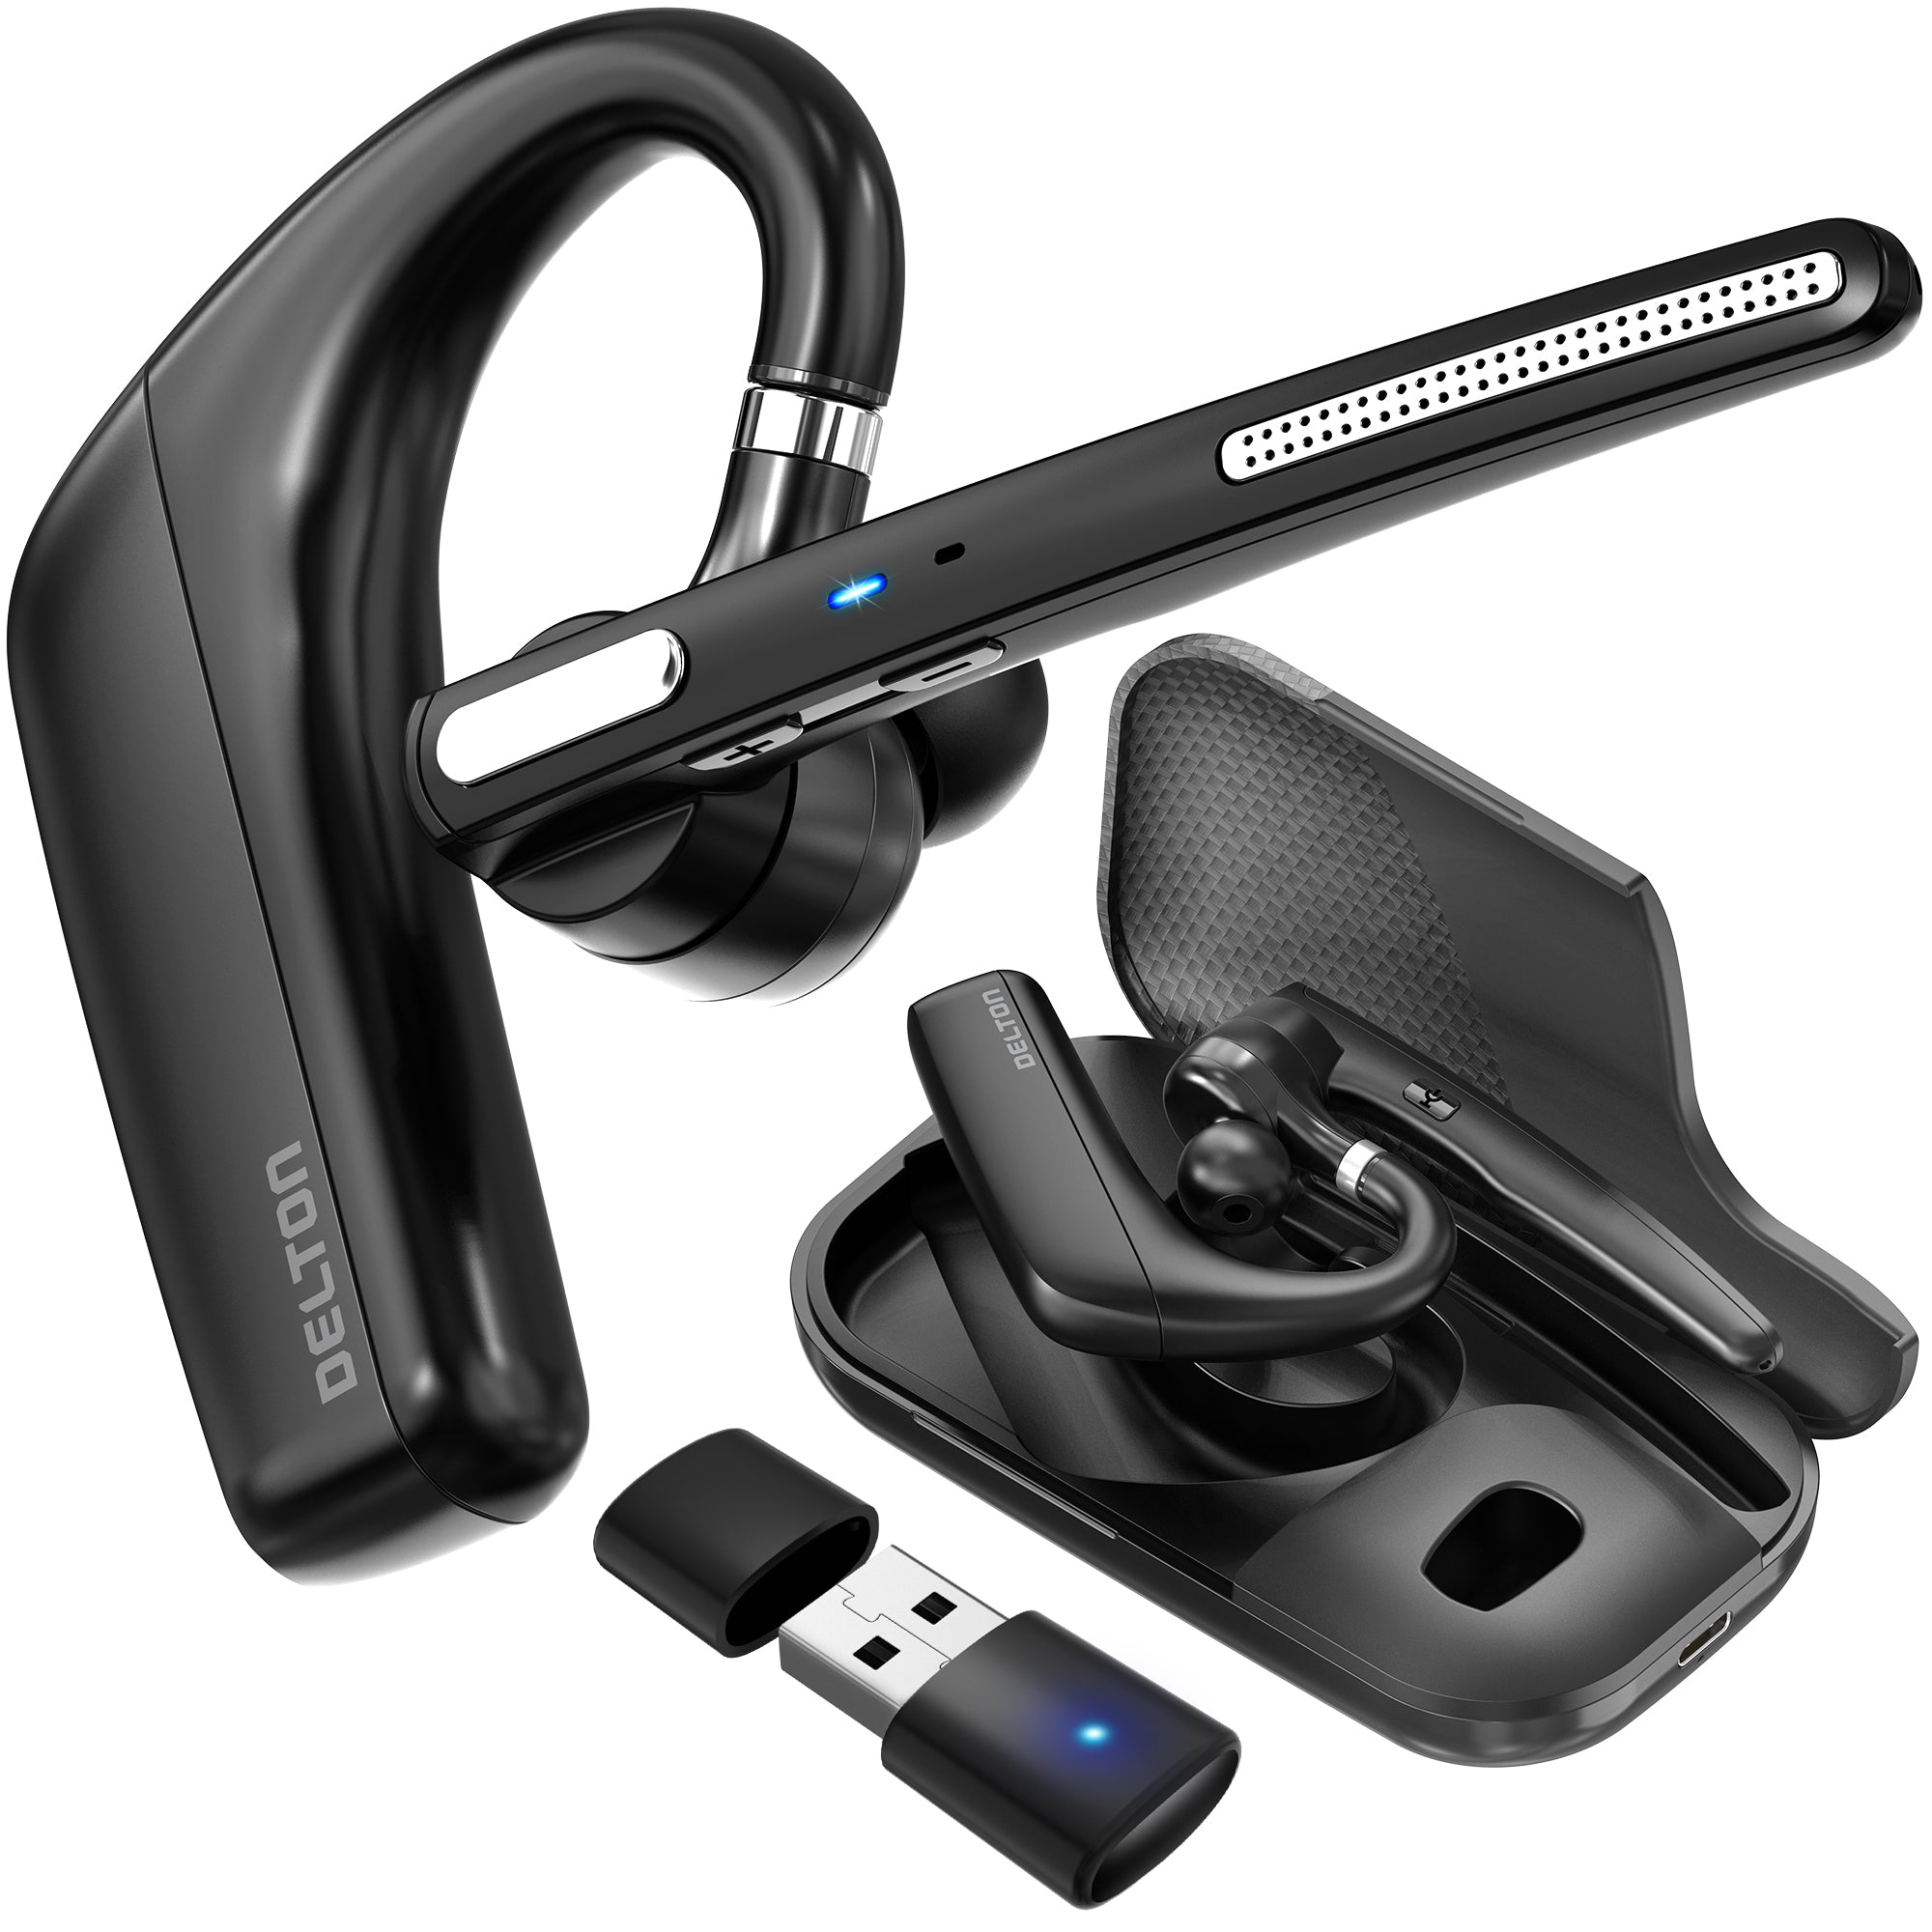 Delton 90X Executive Wireless Computer Headset with Dongle